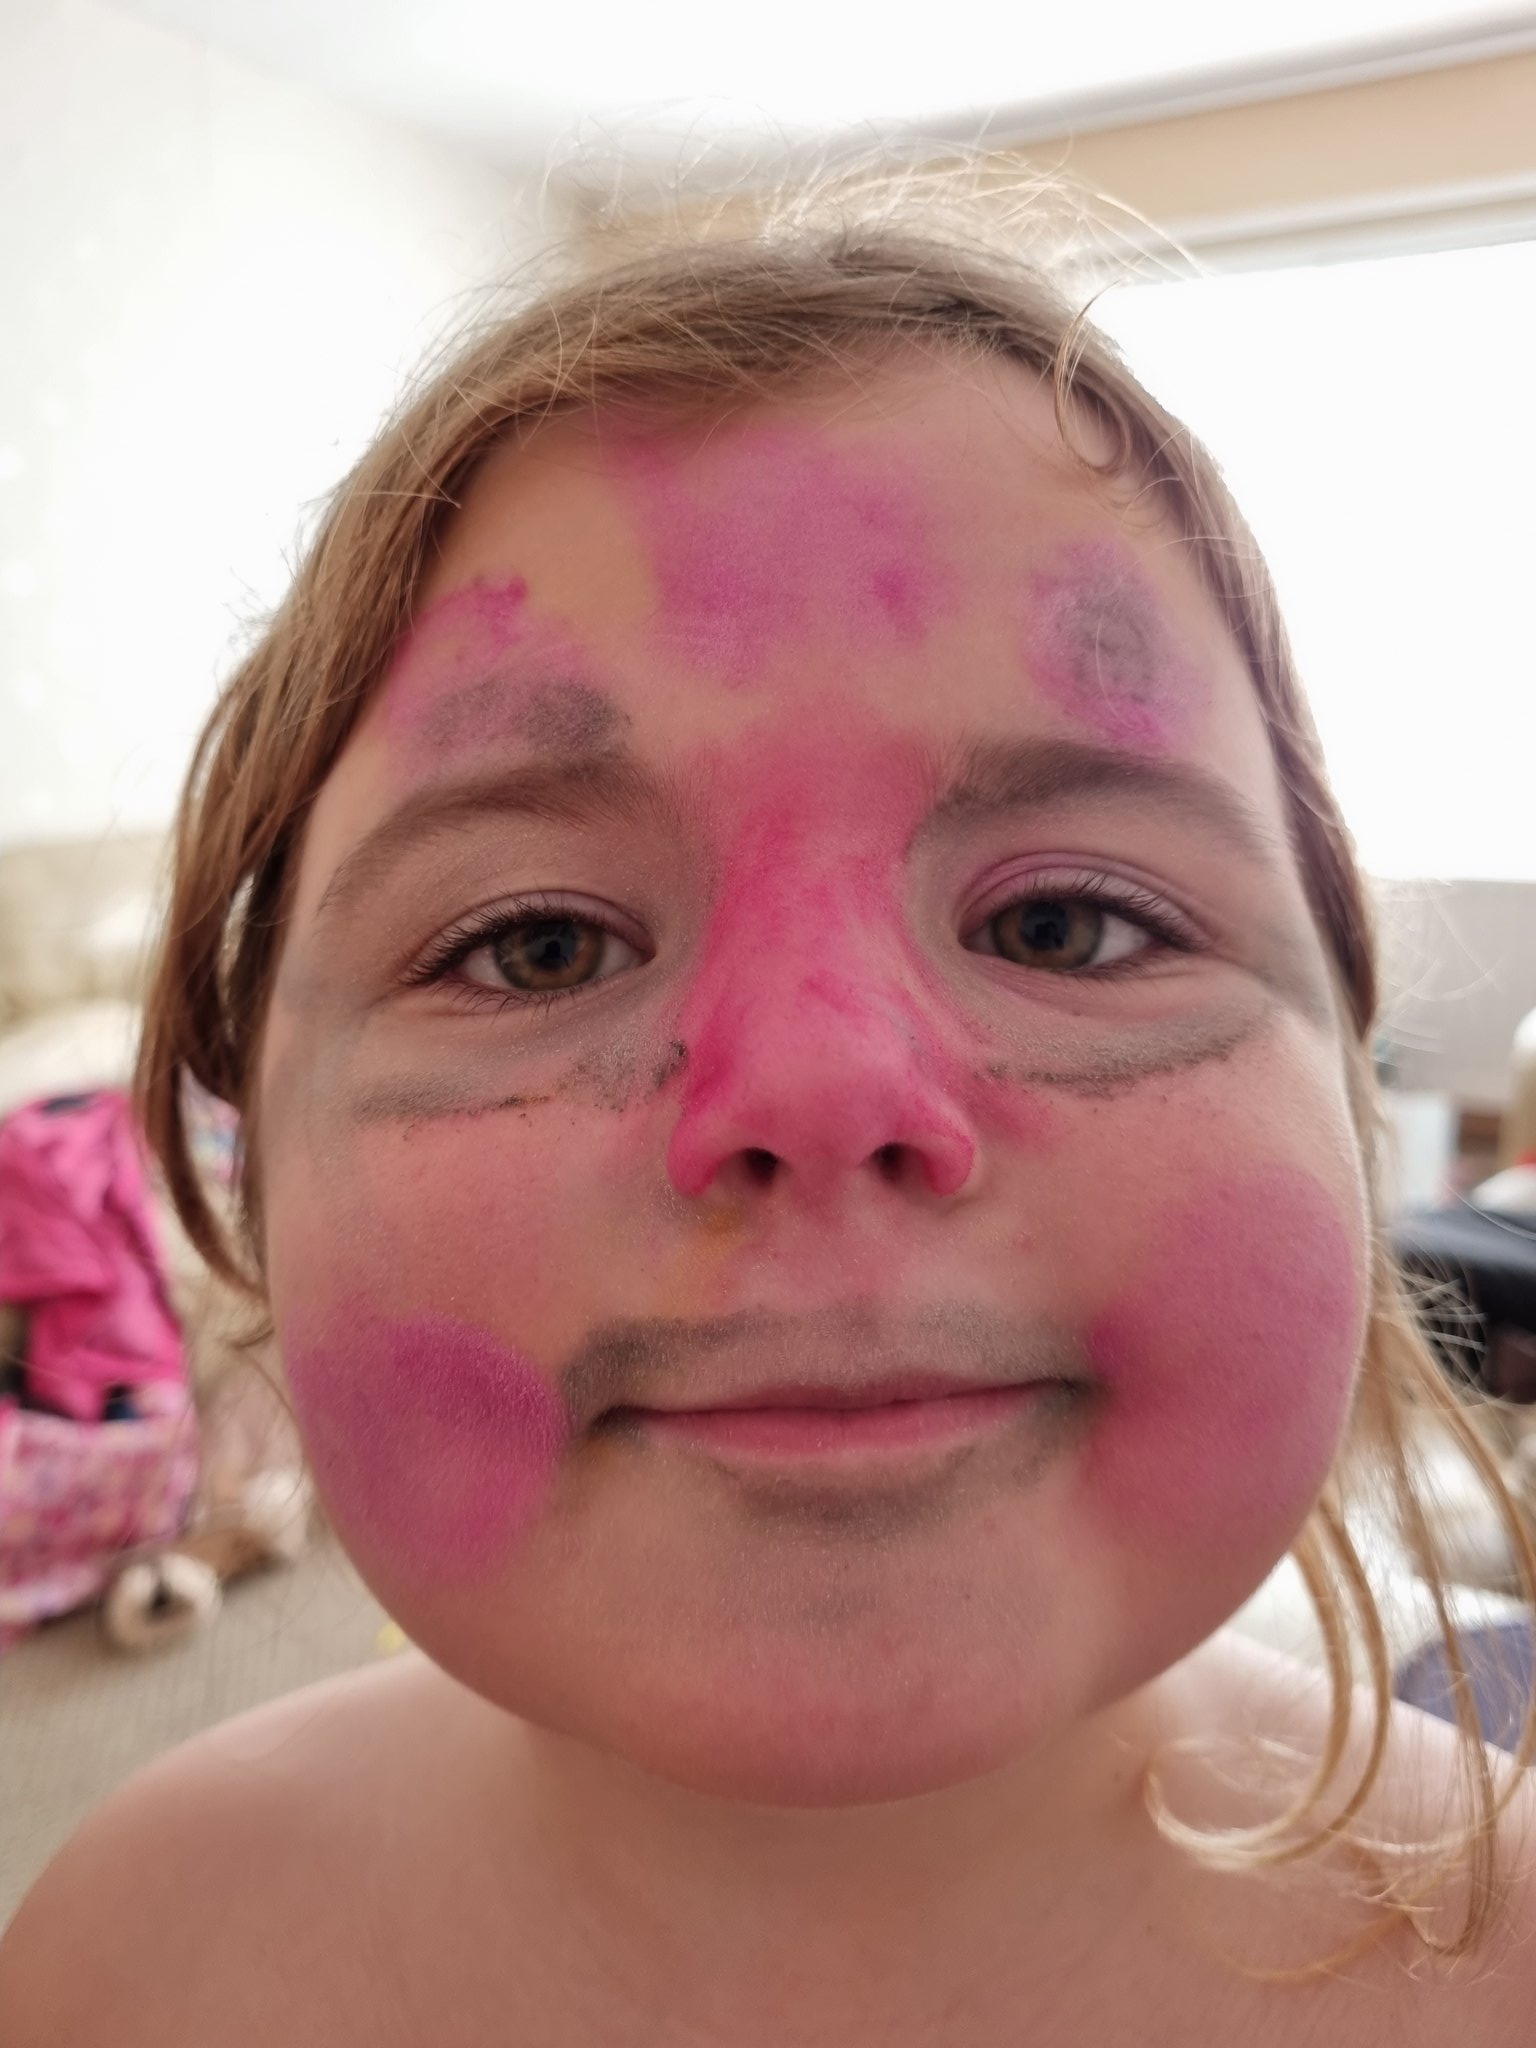 Ryan Leston on X: Got my daughter some kid-friendly makeup for